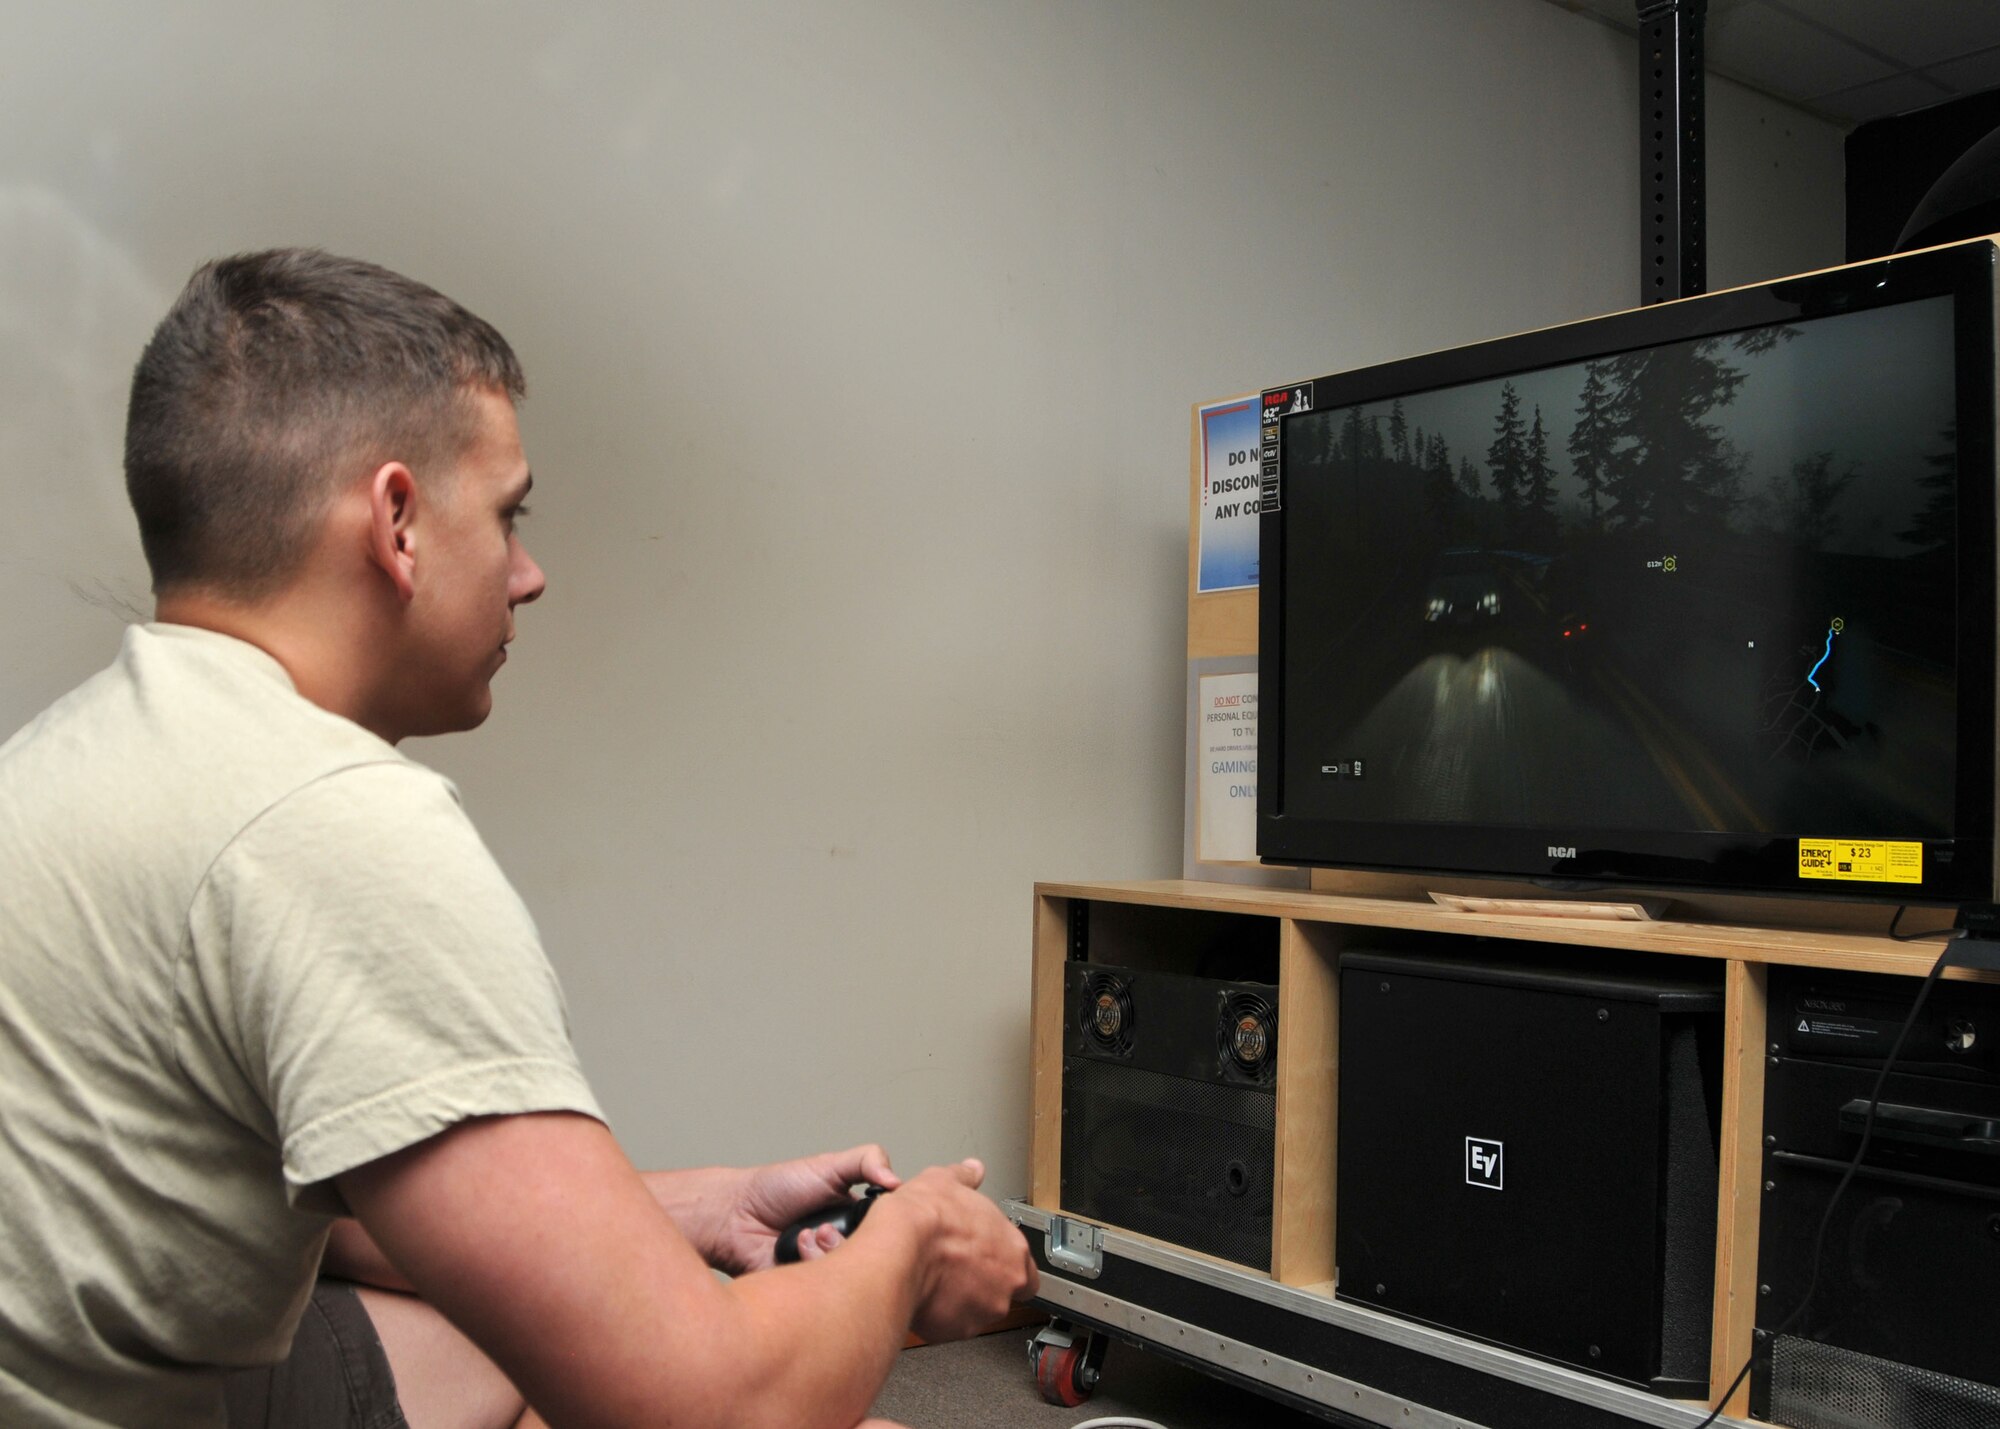 Air Force Senior Airman Zachary Osius plays a game in the video room of the 380th Air Expeditionary Wing’s community activities center at an undisclosed location of Southwest Asia, June 4, 2014. (U.S. Air Force photo by Senior Master Sgt. Eric Peterson/Released)